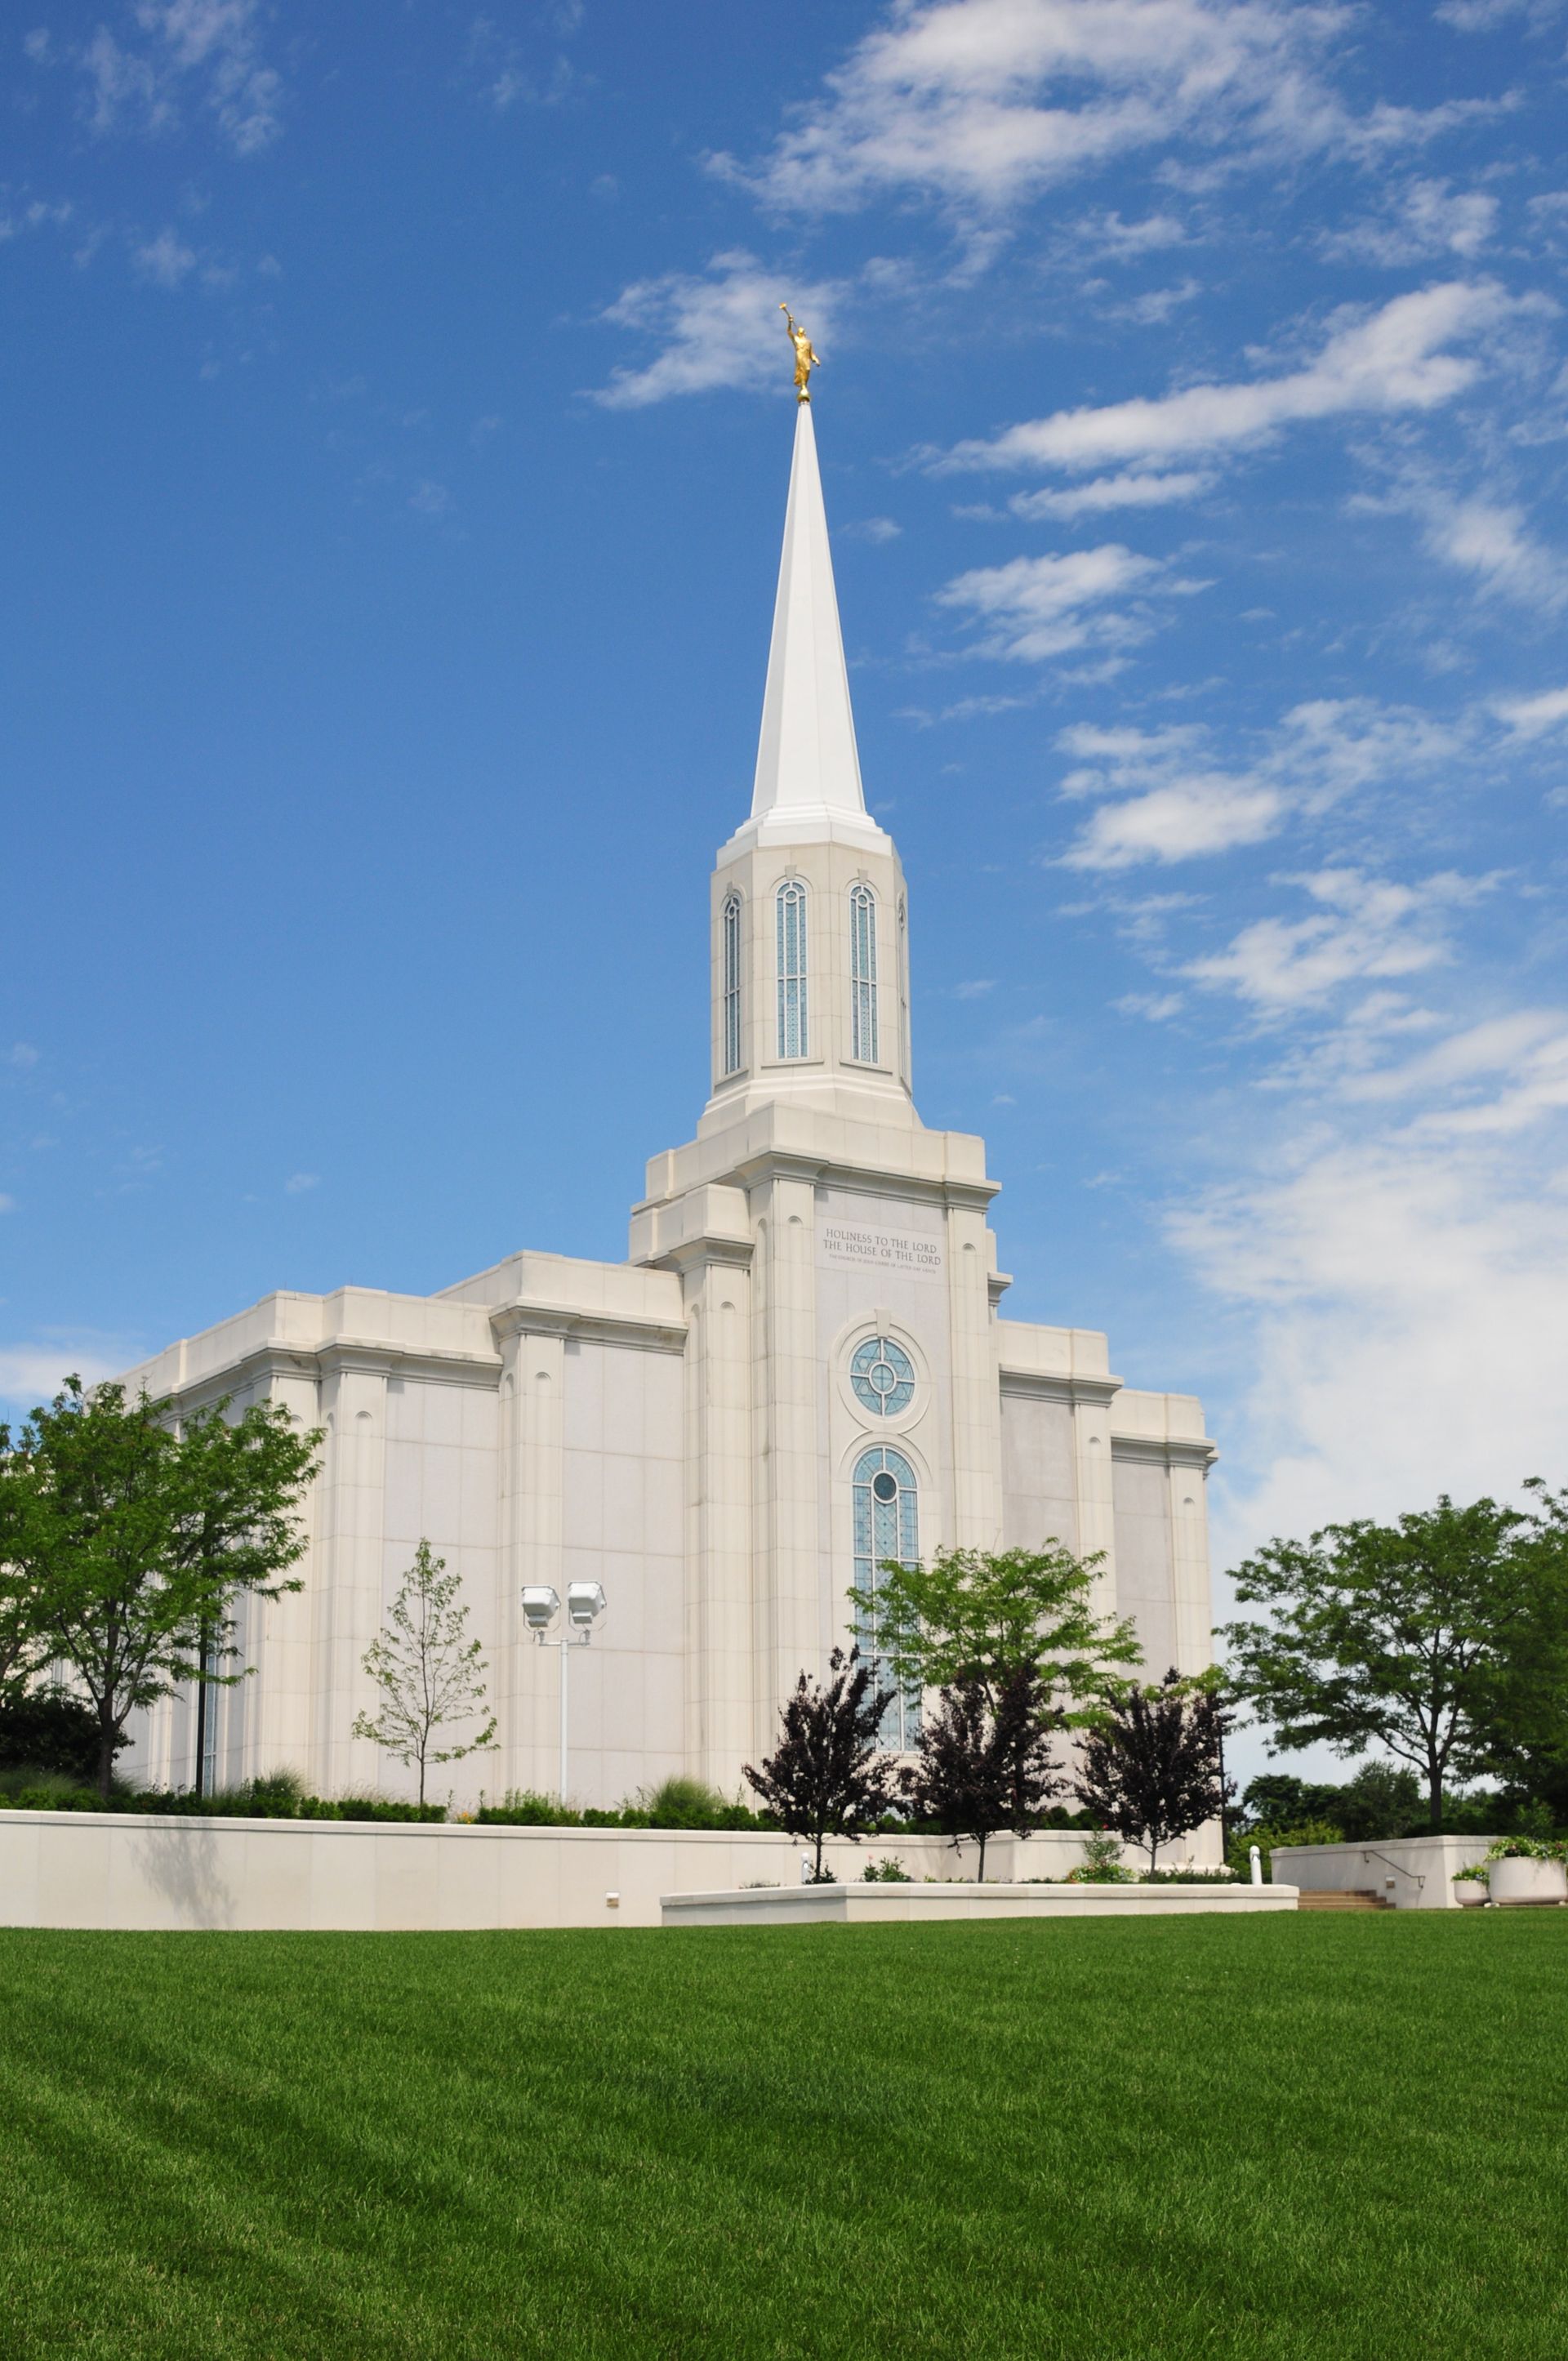 The St. Louis Missouri Temple, including scenery.